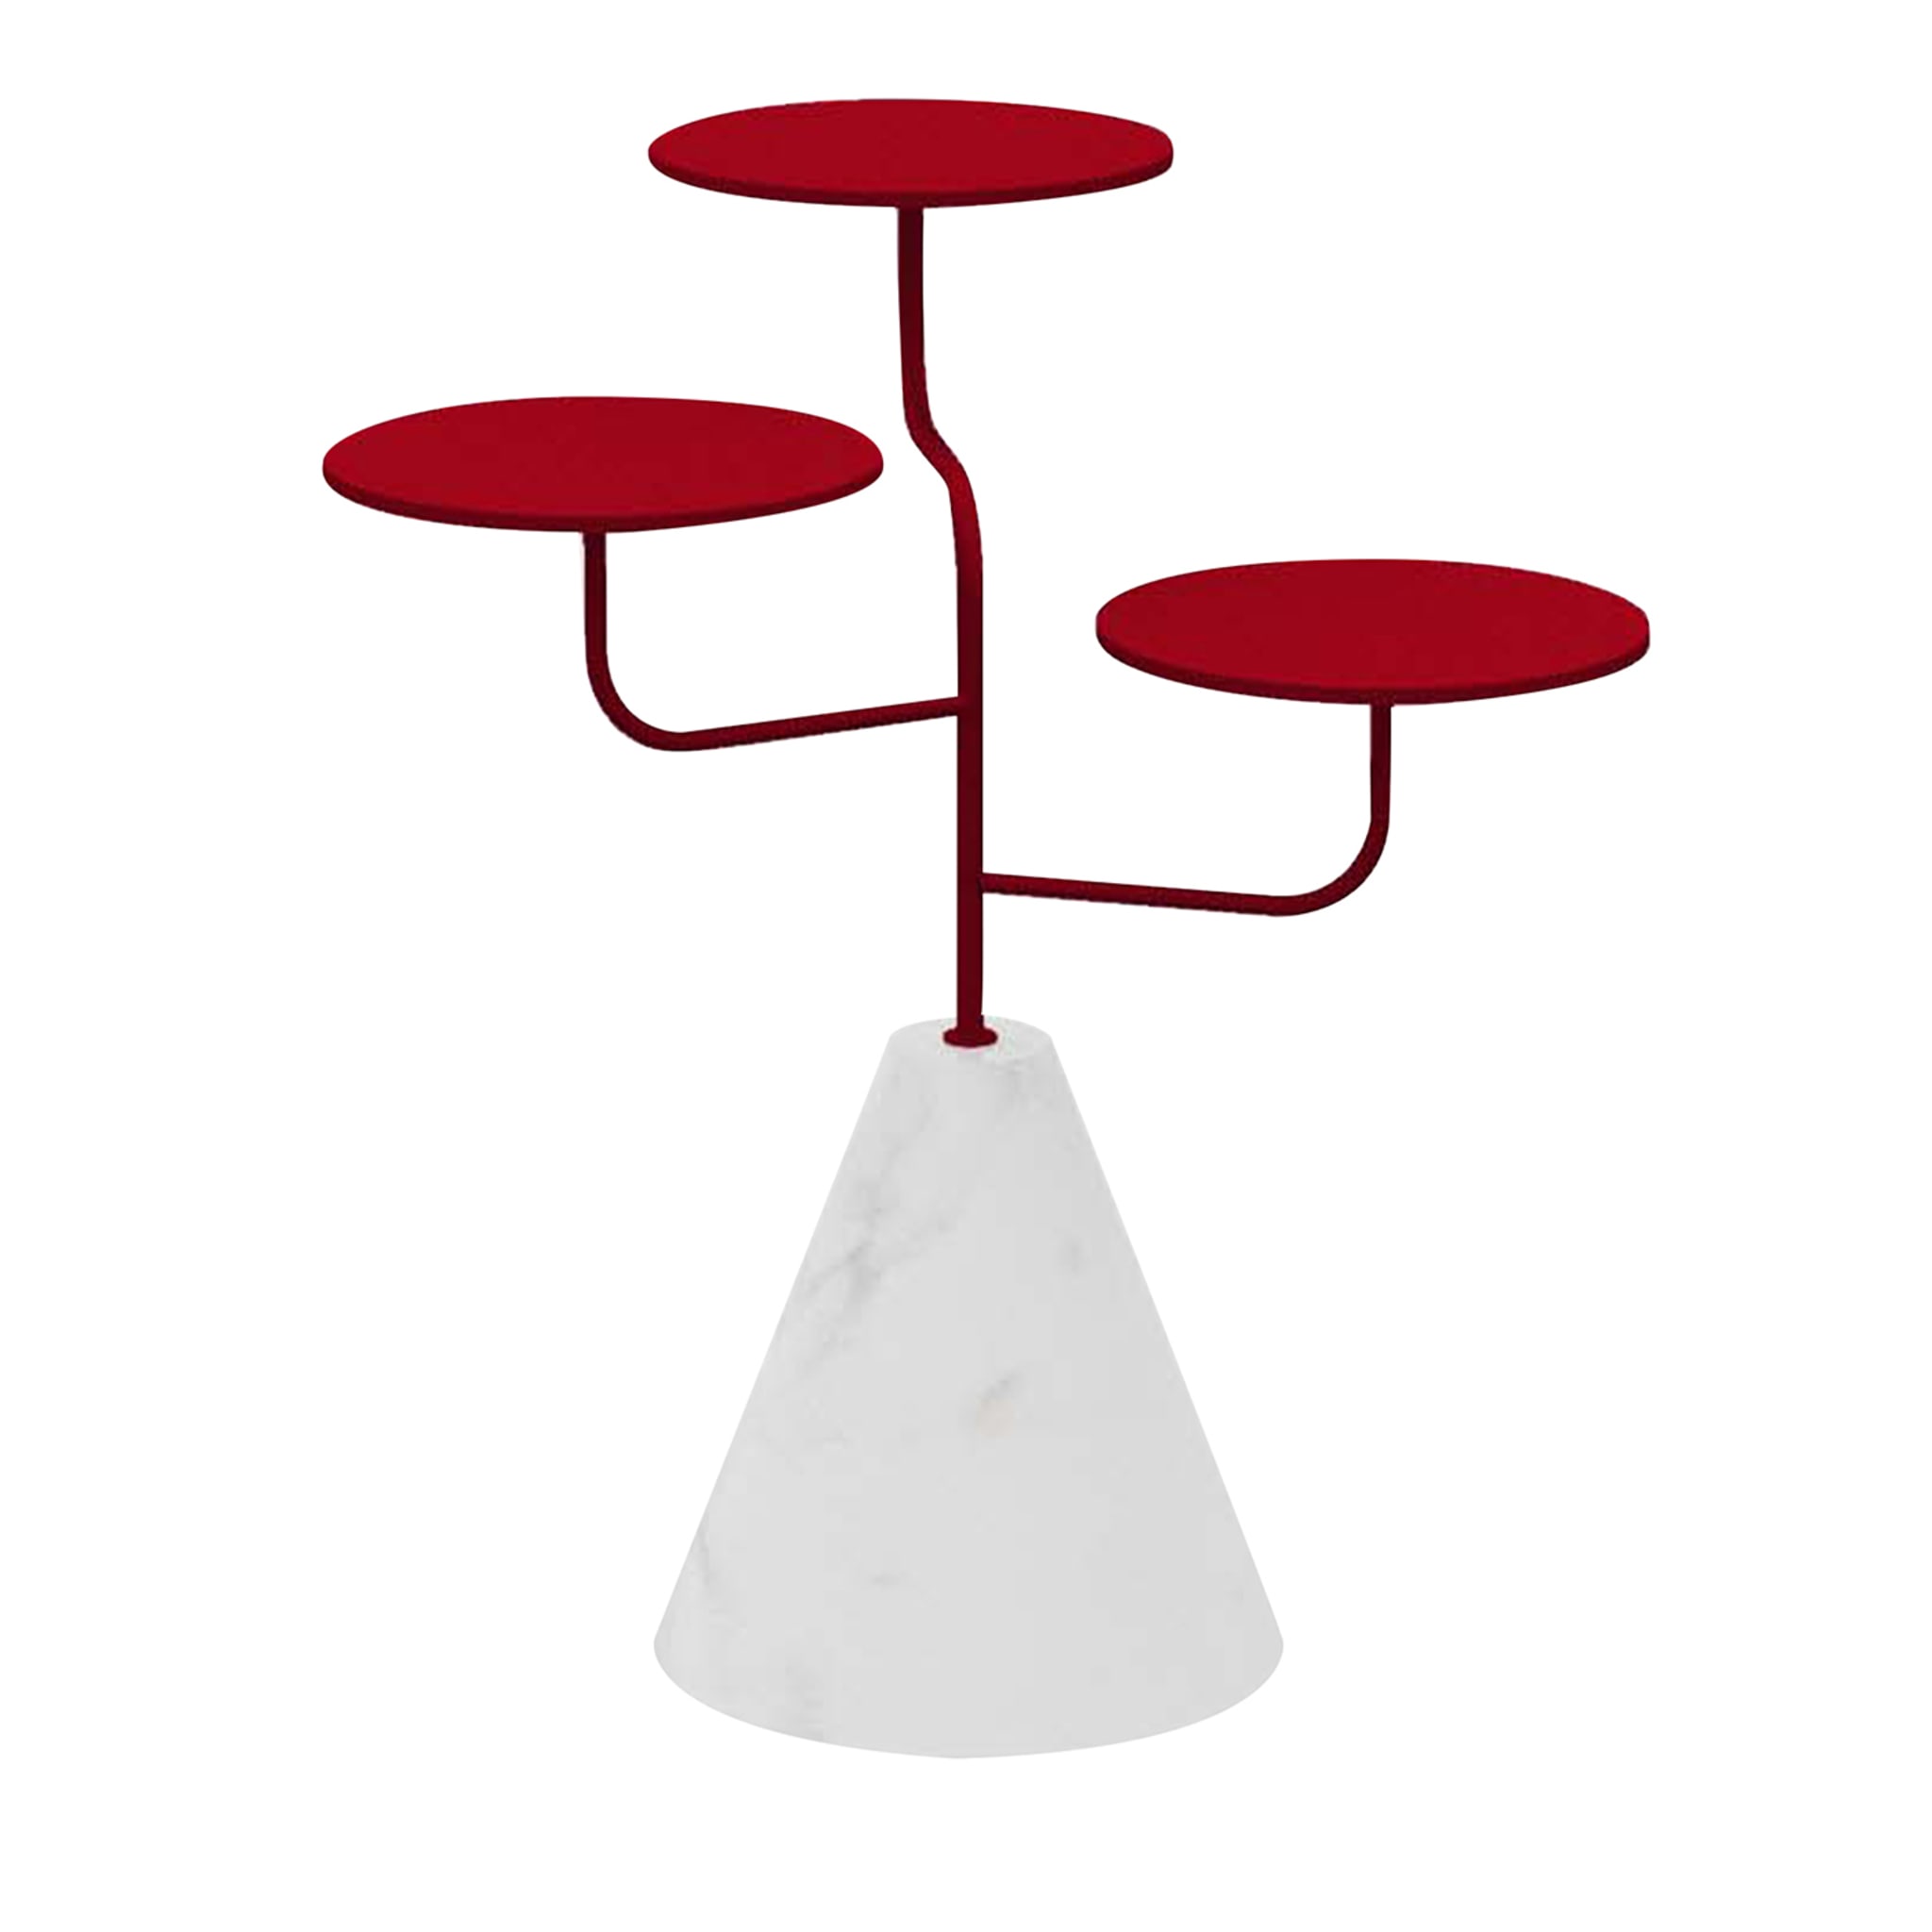 Condiviso 3-Tier Ruby Red/White Carrara Serving Stand - Main view